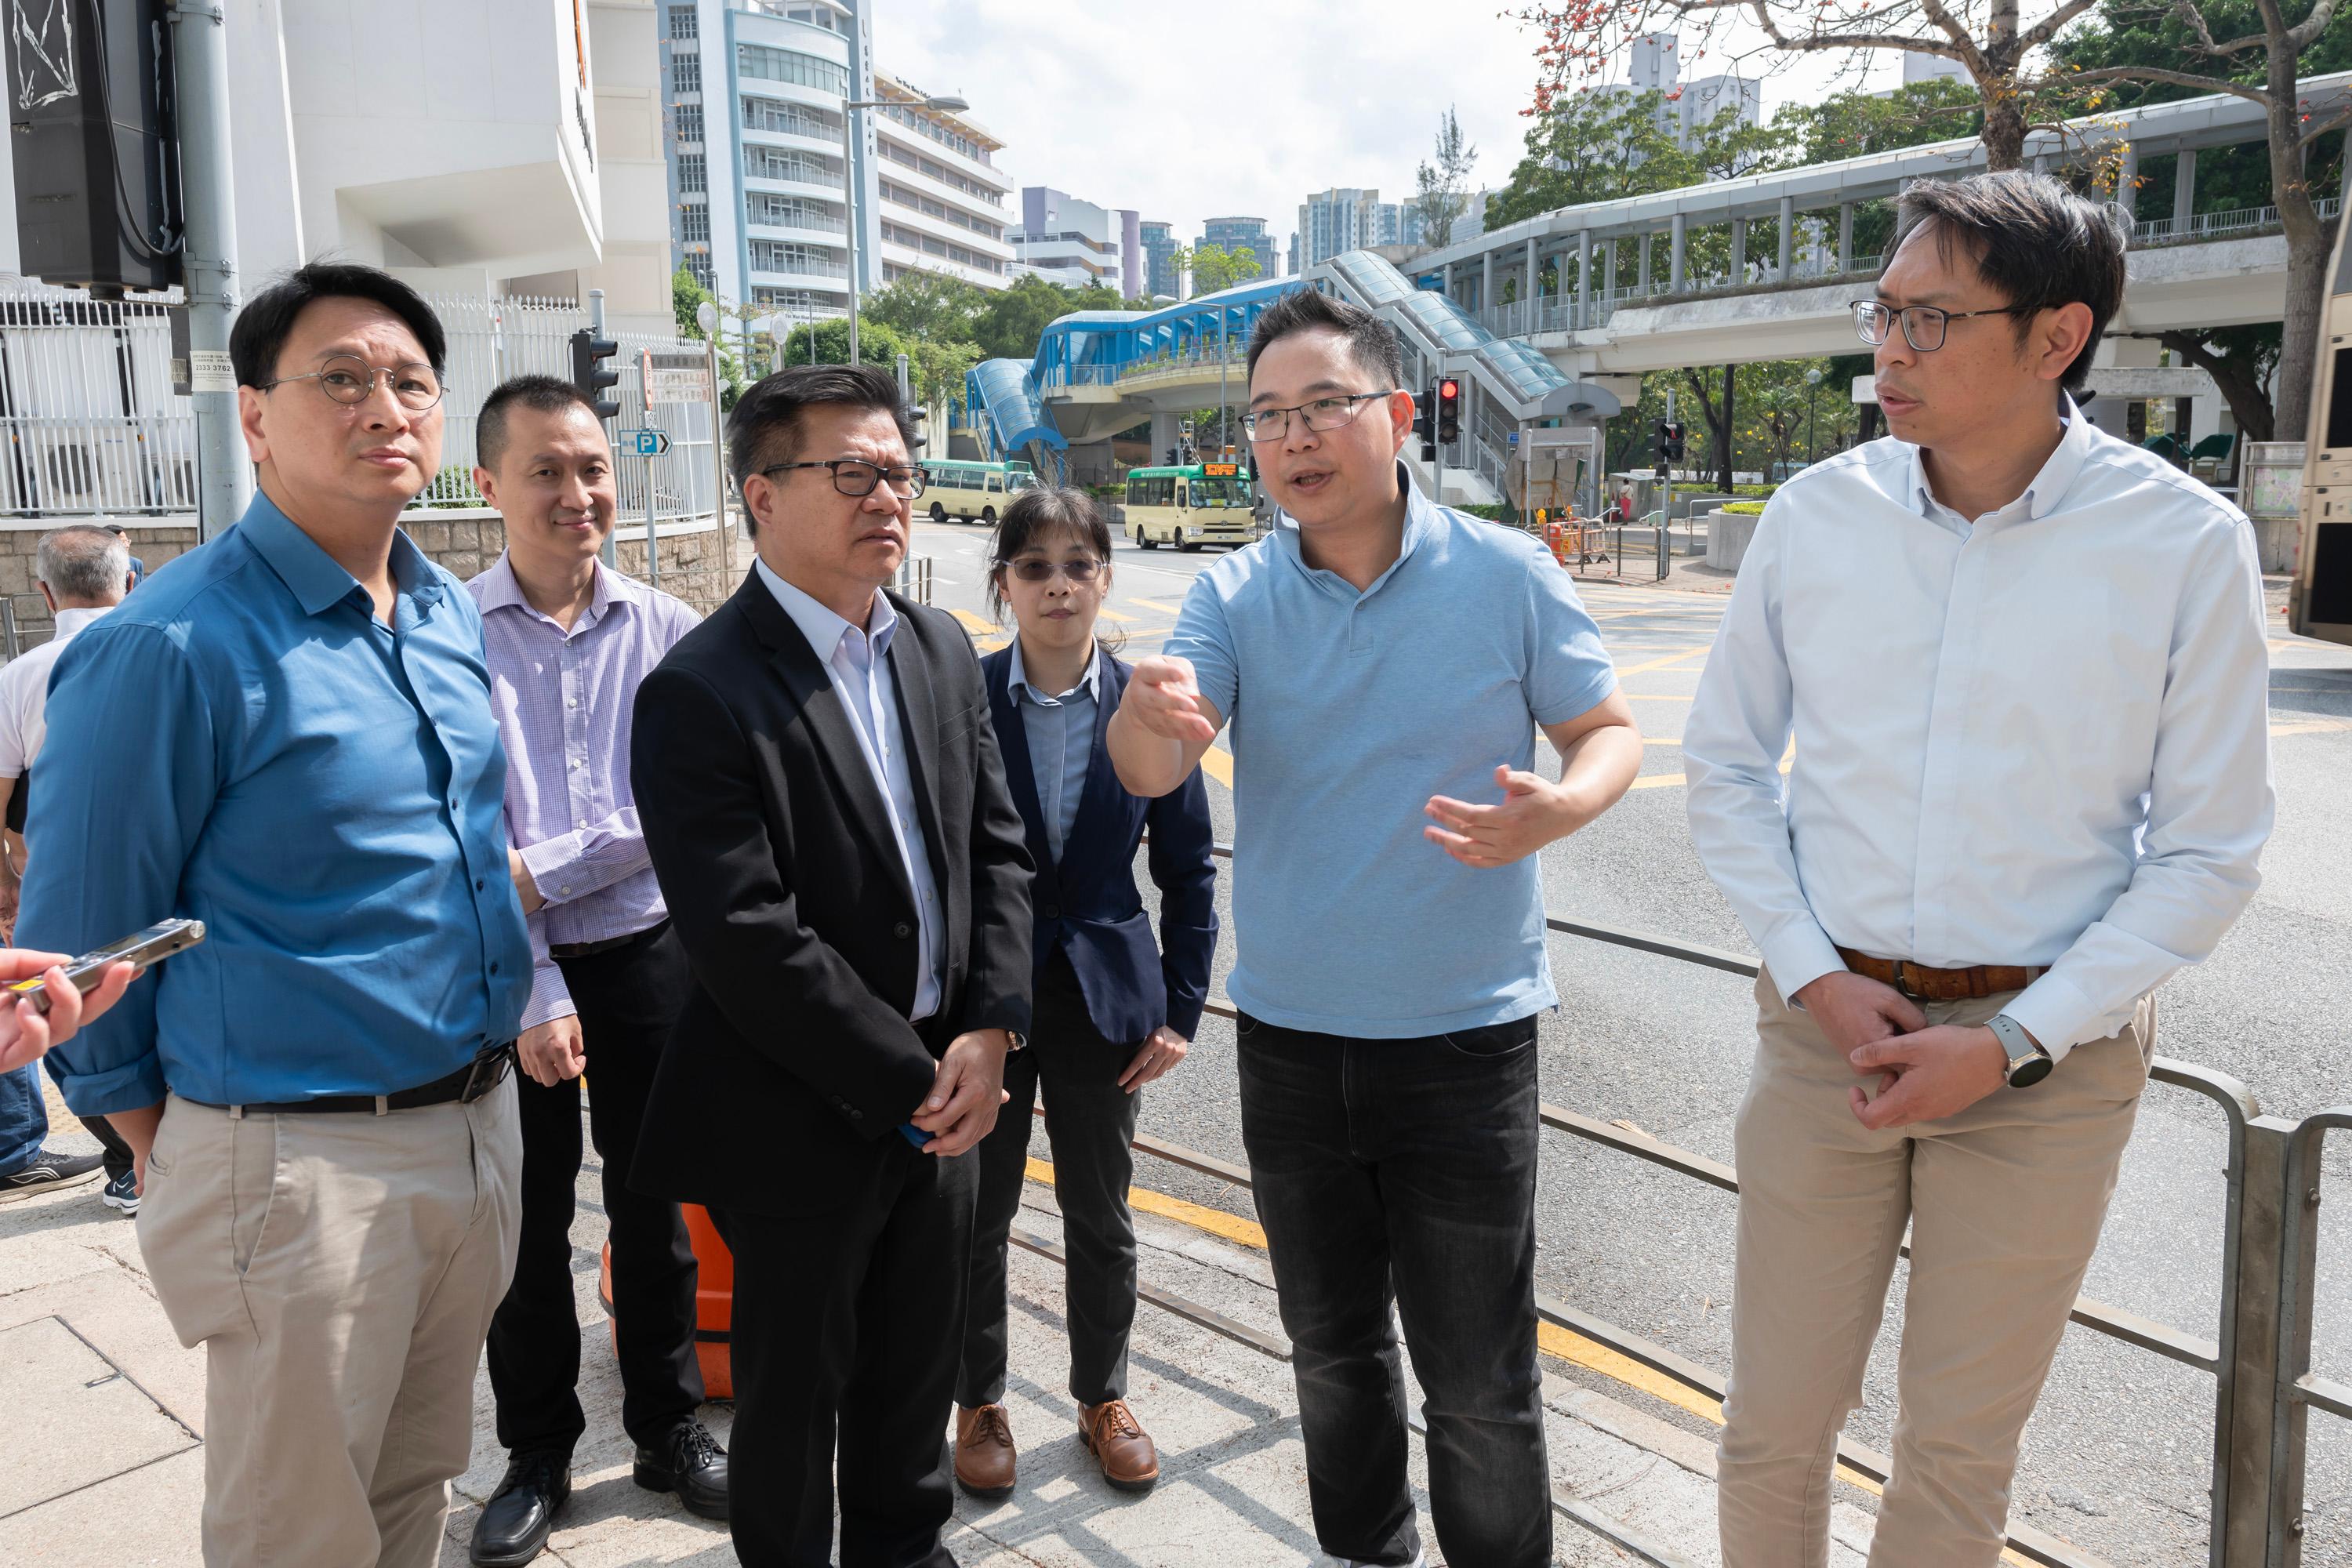 Legislative Council Members conducted a site visit to Tsz Wan Shan area today (March 25) to follow up on issues raised by a deputation relating to a request for provision of Tsz Wan Shan station on the East Kowloon "Crossing-the-Hill" Line. Photo shows members observing the geographical environment and actual situation of the area on Tsz Wan Shan Road.